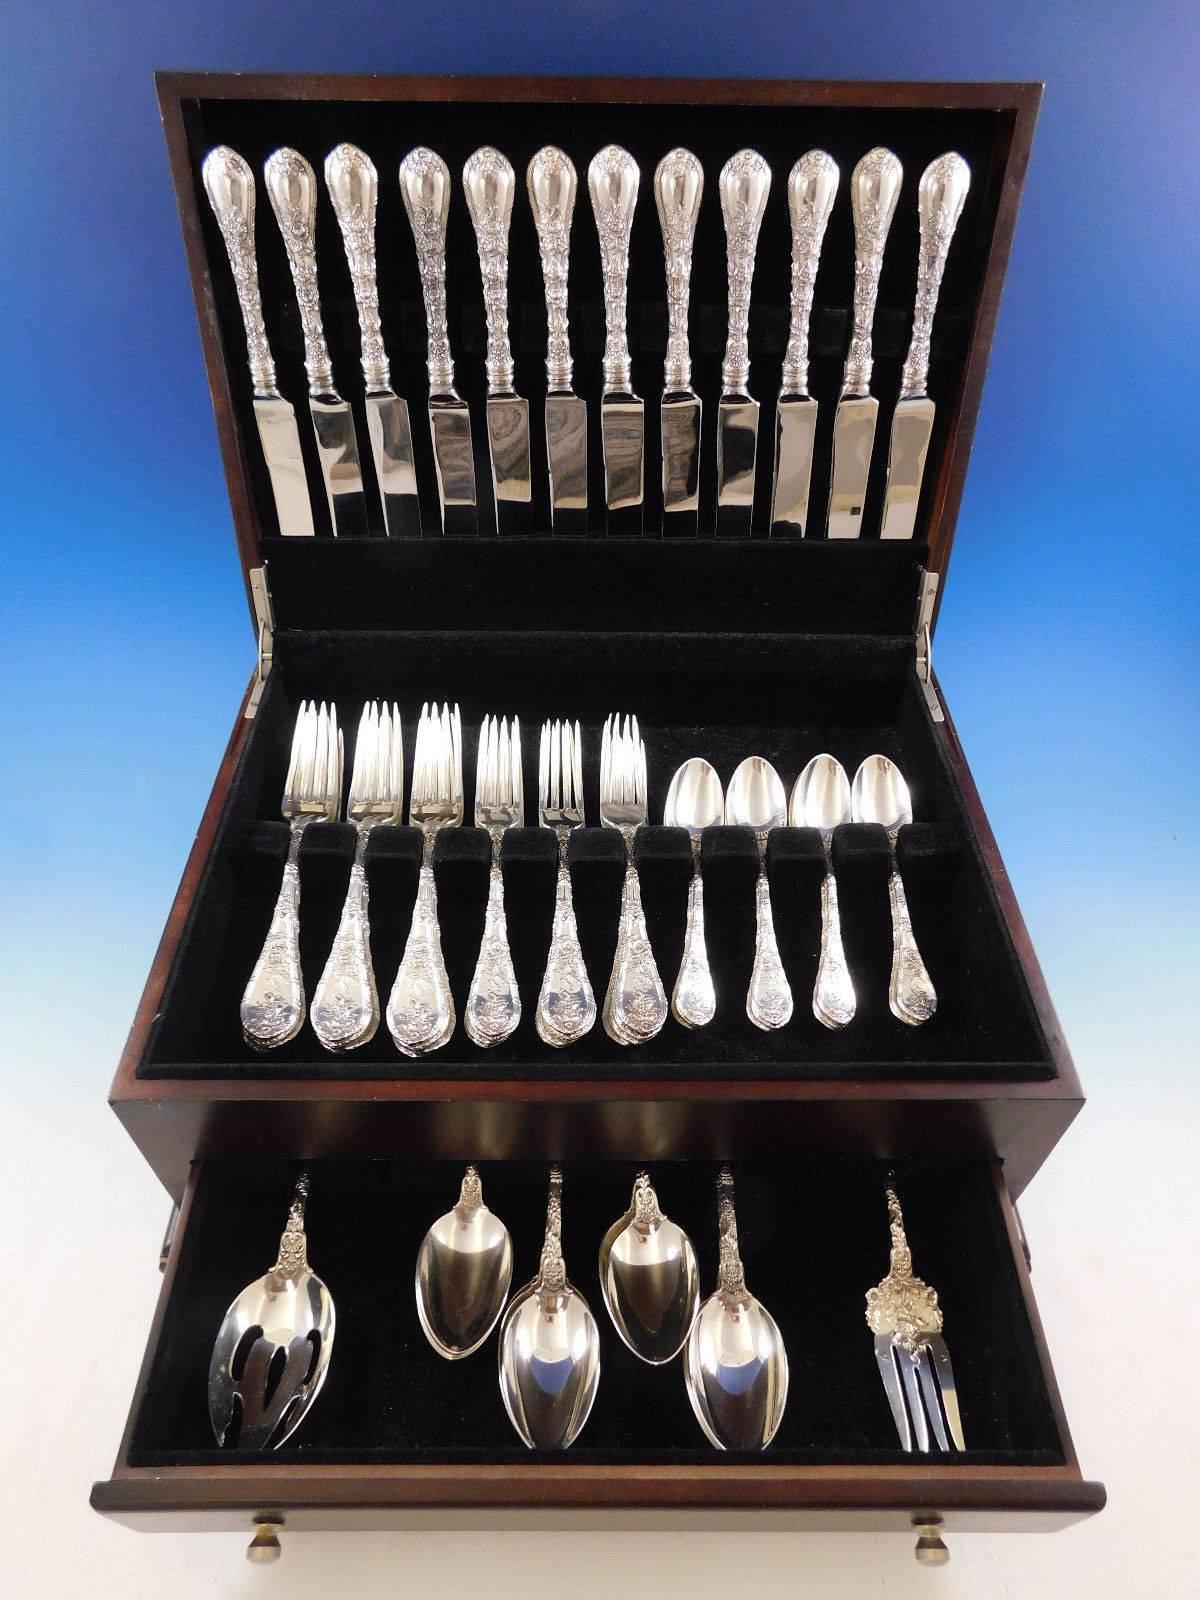 Dauphin by Durgin/Gorham sterling silver flatware set, 62 pieces. This set includes: 12 dinner size knives, with French blades, 9 1/2